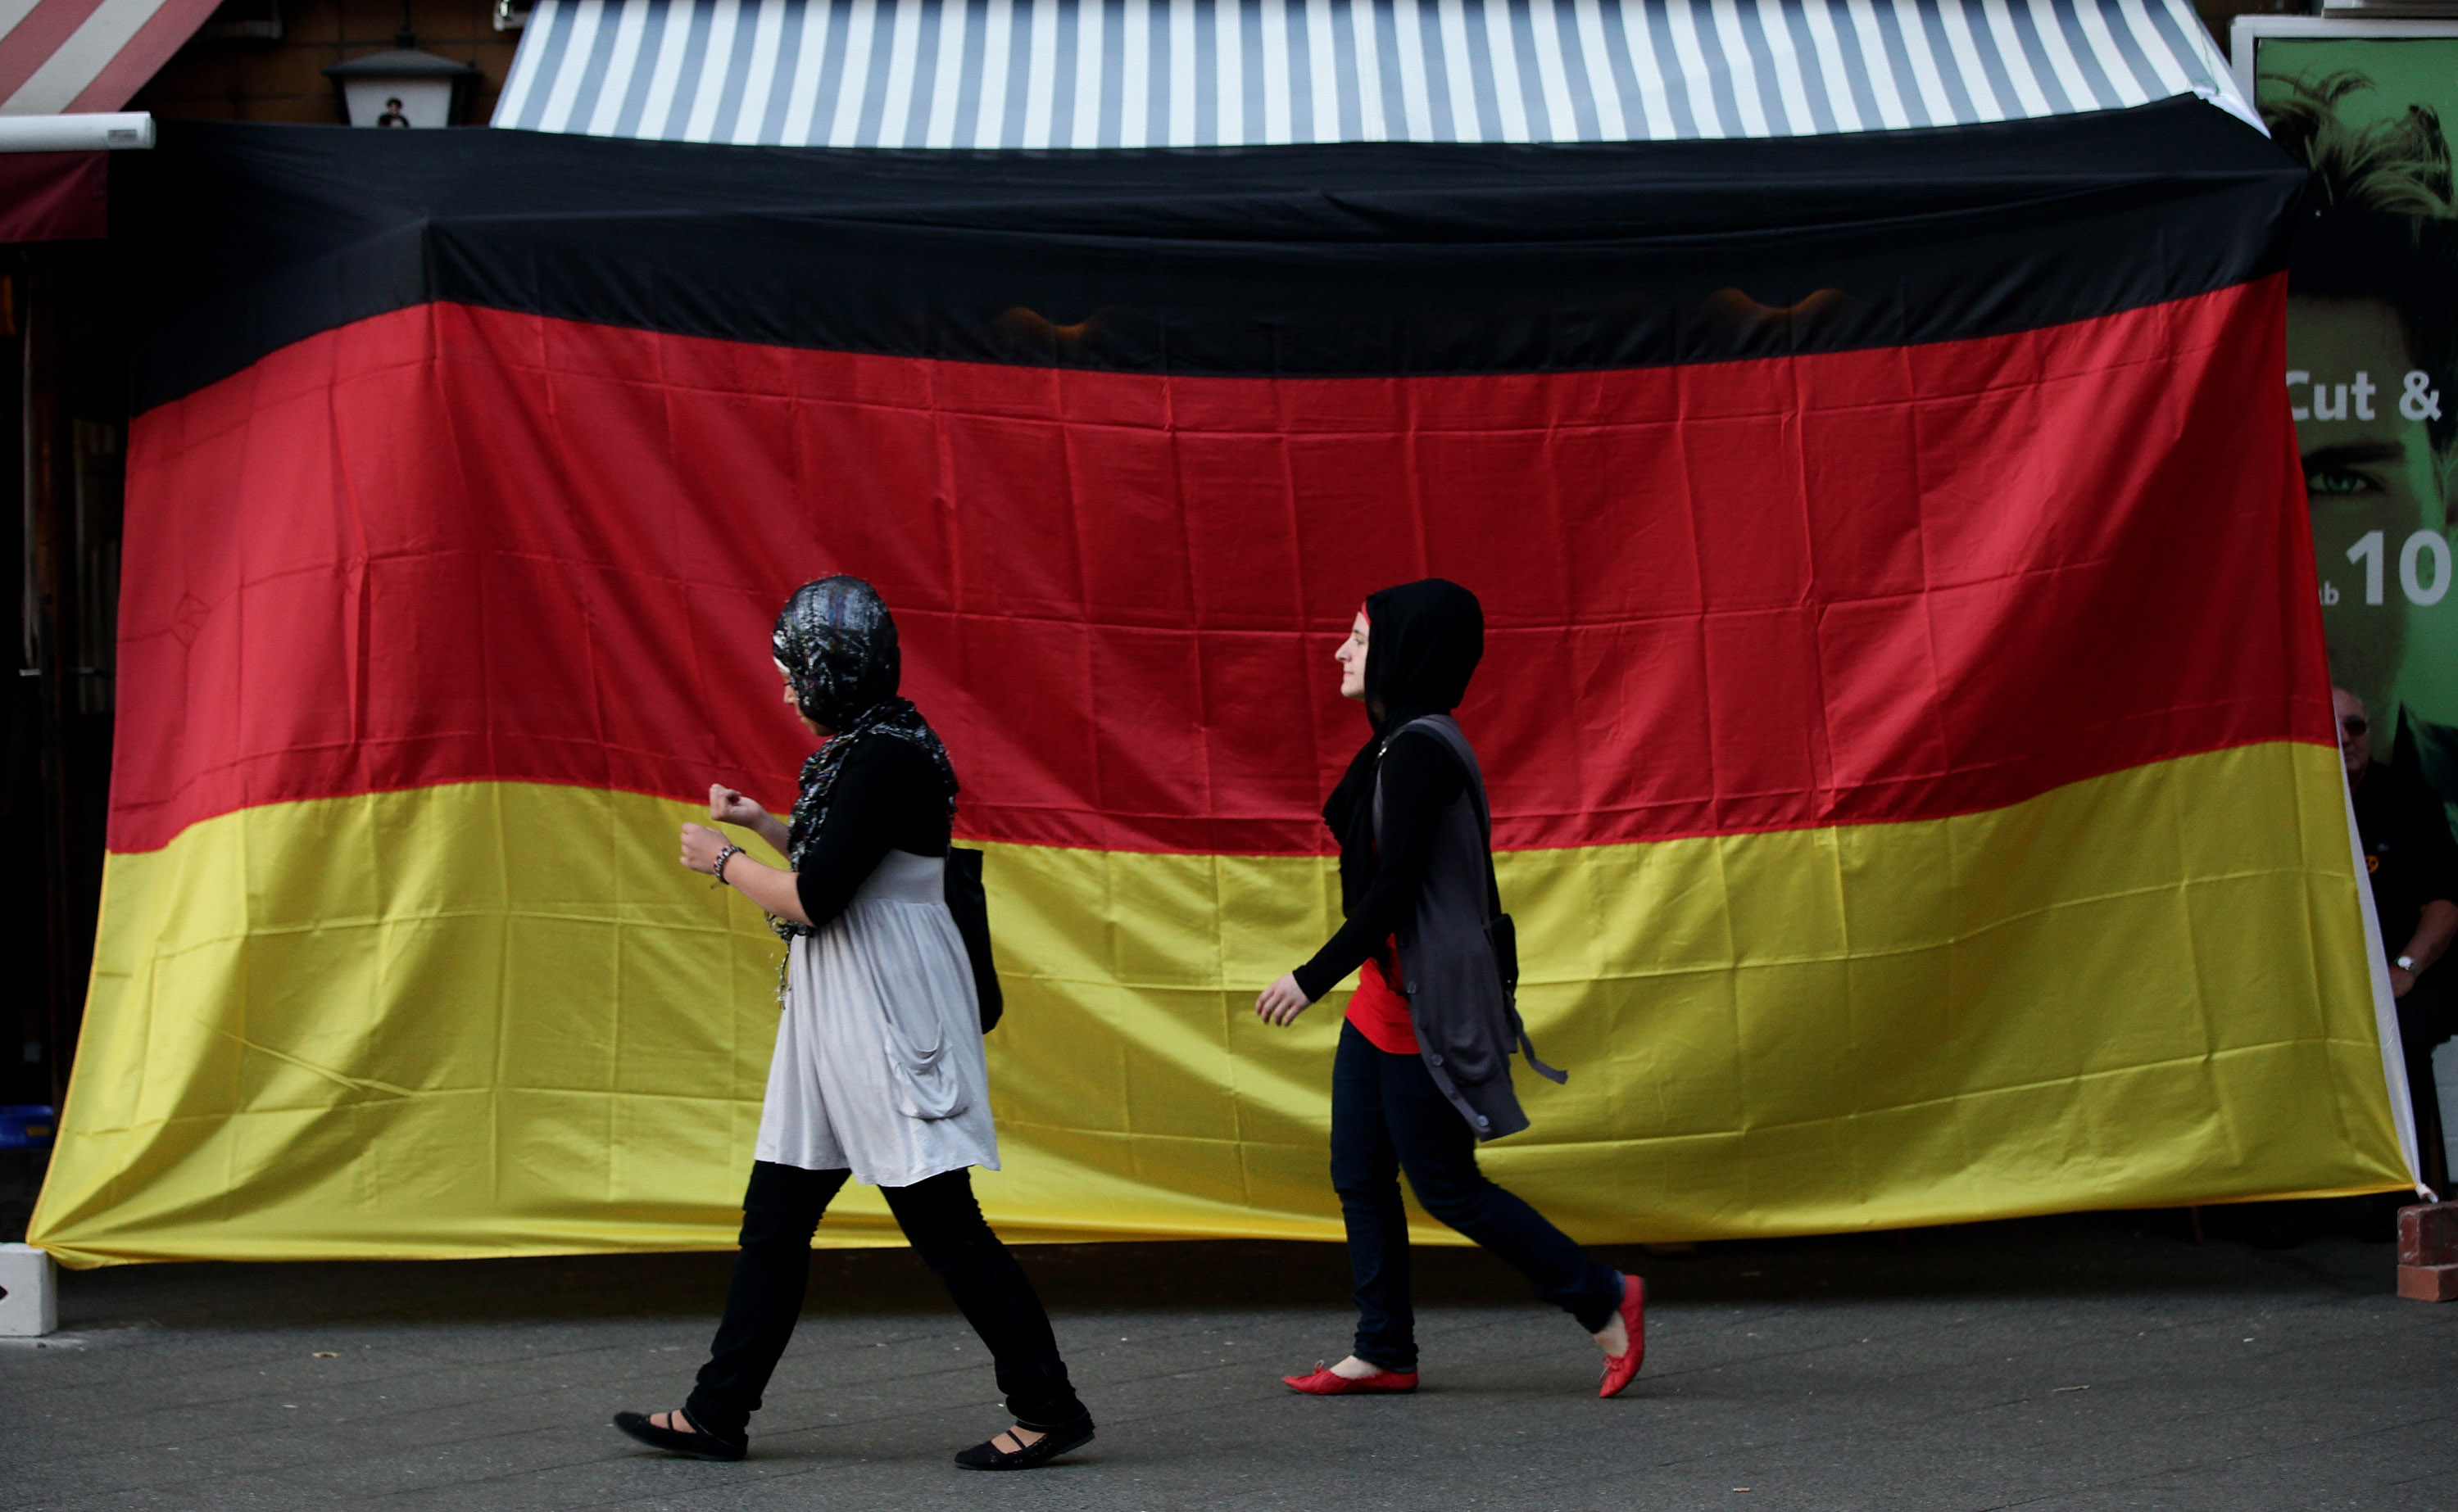 BERLIN - JULY 07:  Two young Muslim women walk by a pub draped in a German flag in the Arab and Turkish-heavy neighborhood of Neukoelln during the FIFA 2010 World Cup match between Germany and Spain on July 7, 2010 in Berlin, Germany. Many immigrants in G